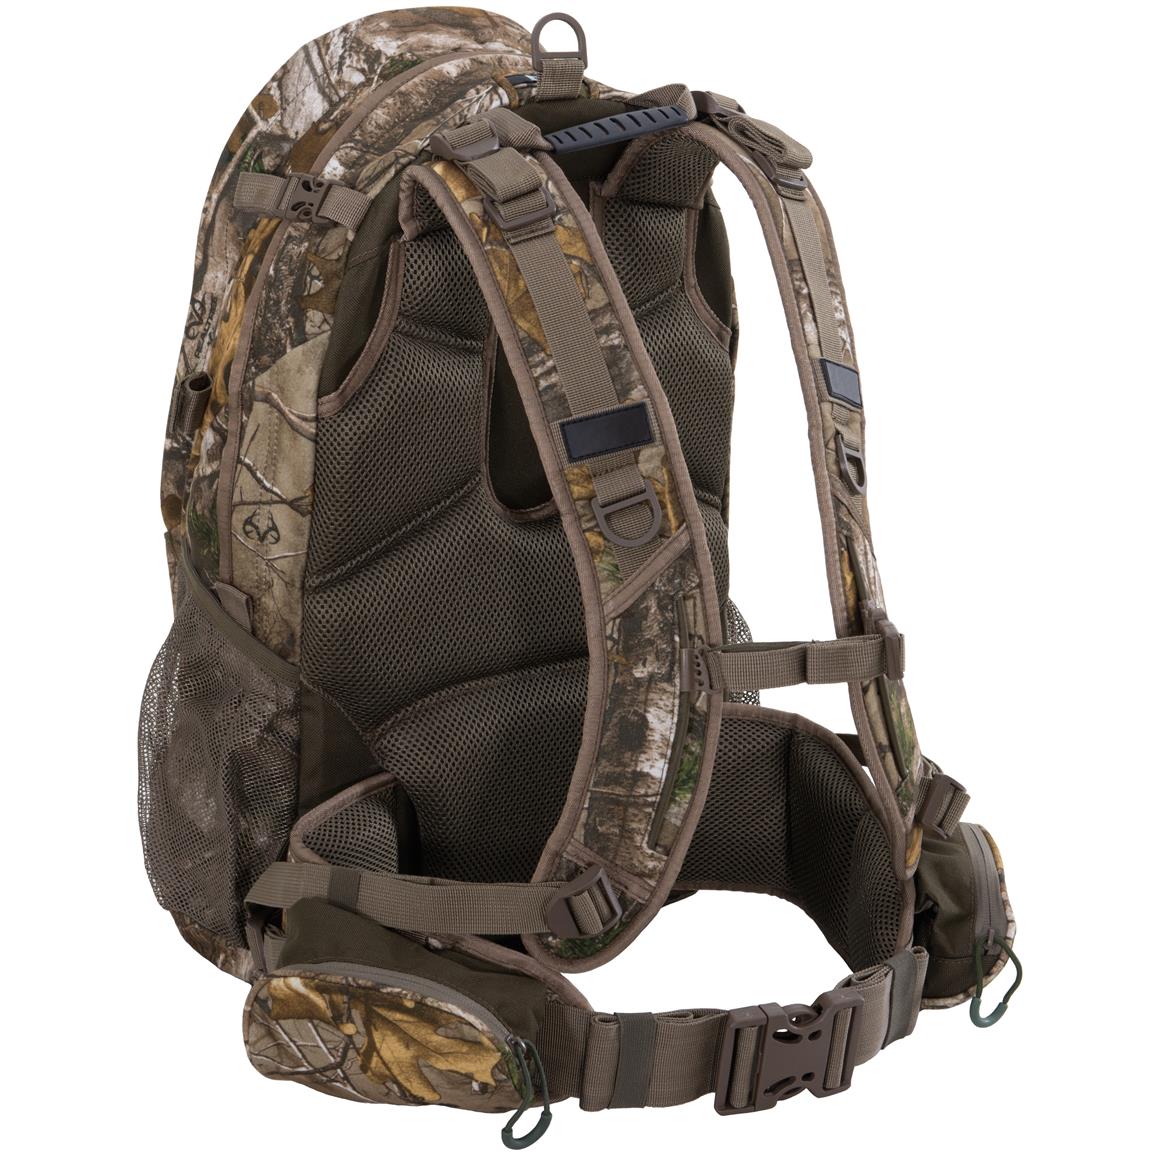 Best Small Hunting Backpack | Paul Smith